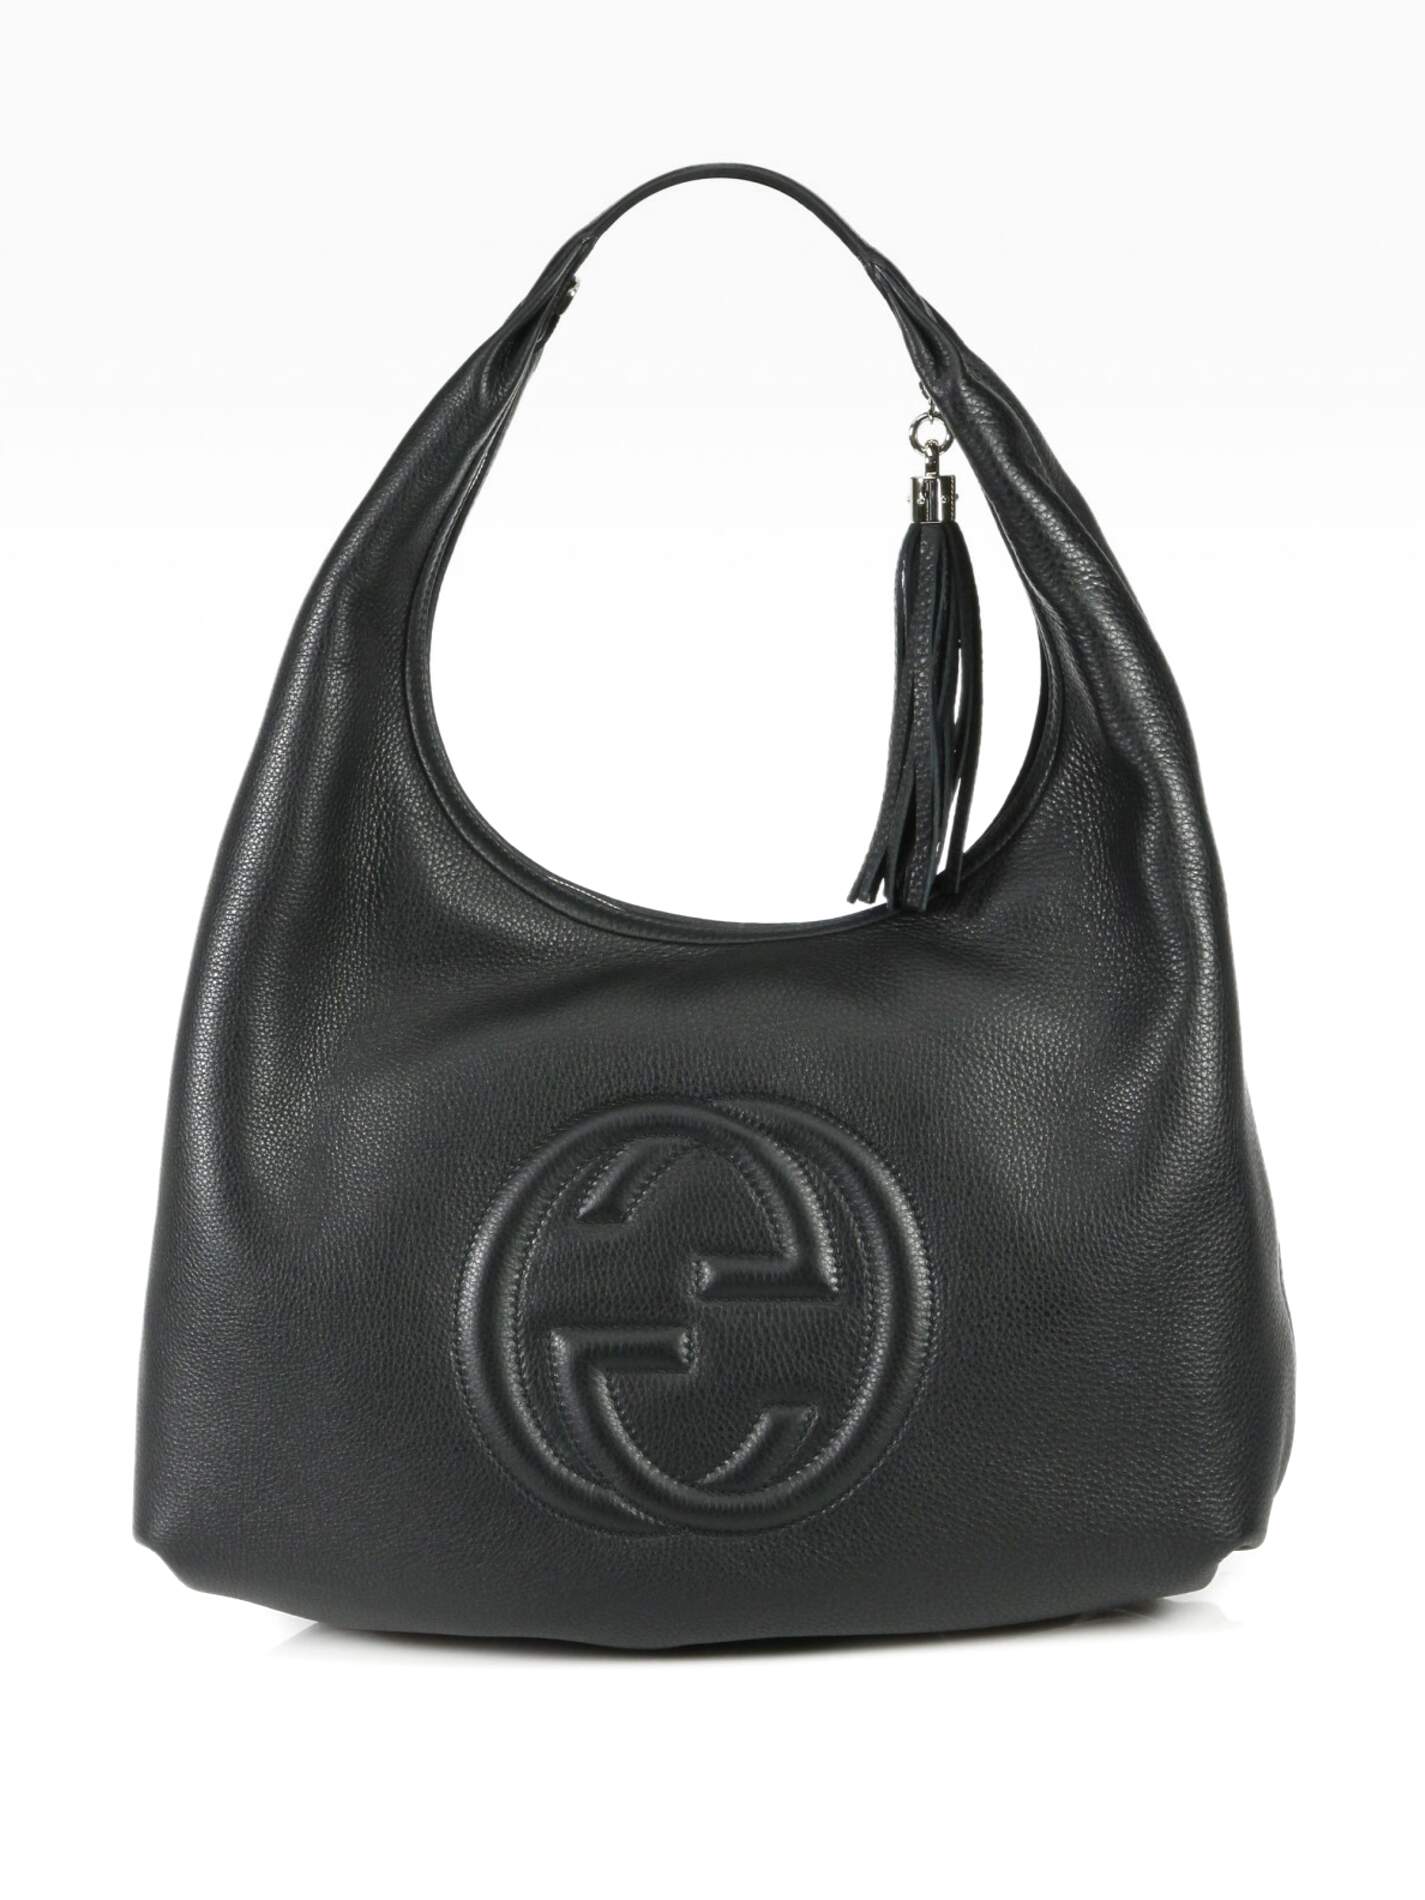 Gucci Soho Bag for sale in UK | 40 used Gucci Soho Bags